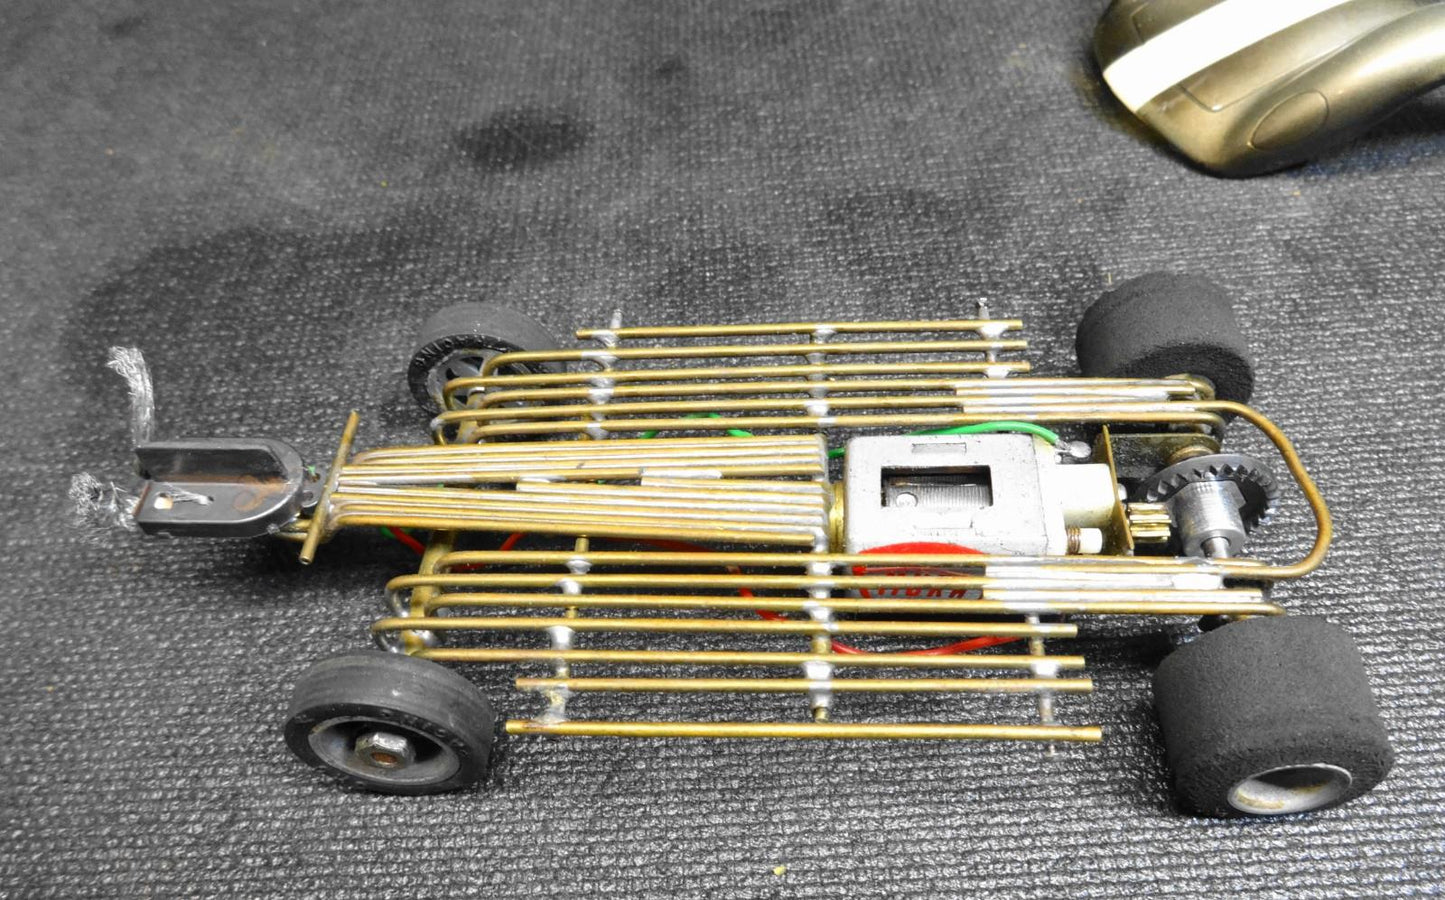 PACTRA (style) Brass Rail Chassis w/ Mura Magnum 88 Magnets Motor - 1/24